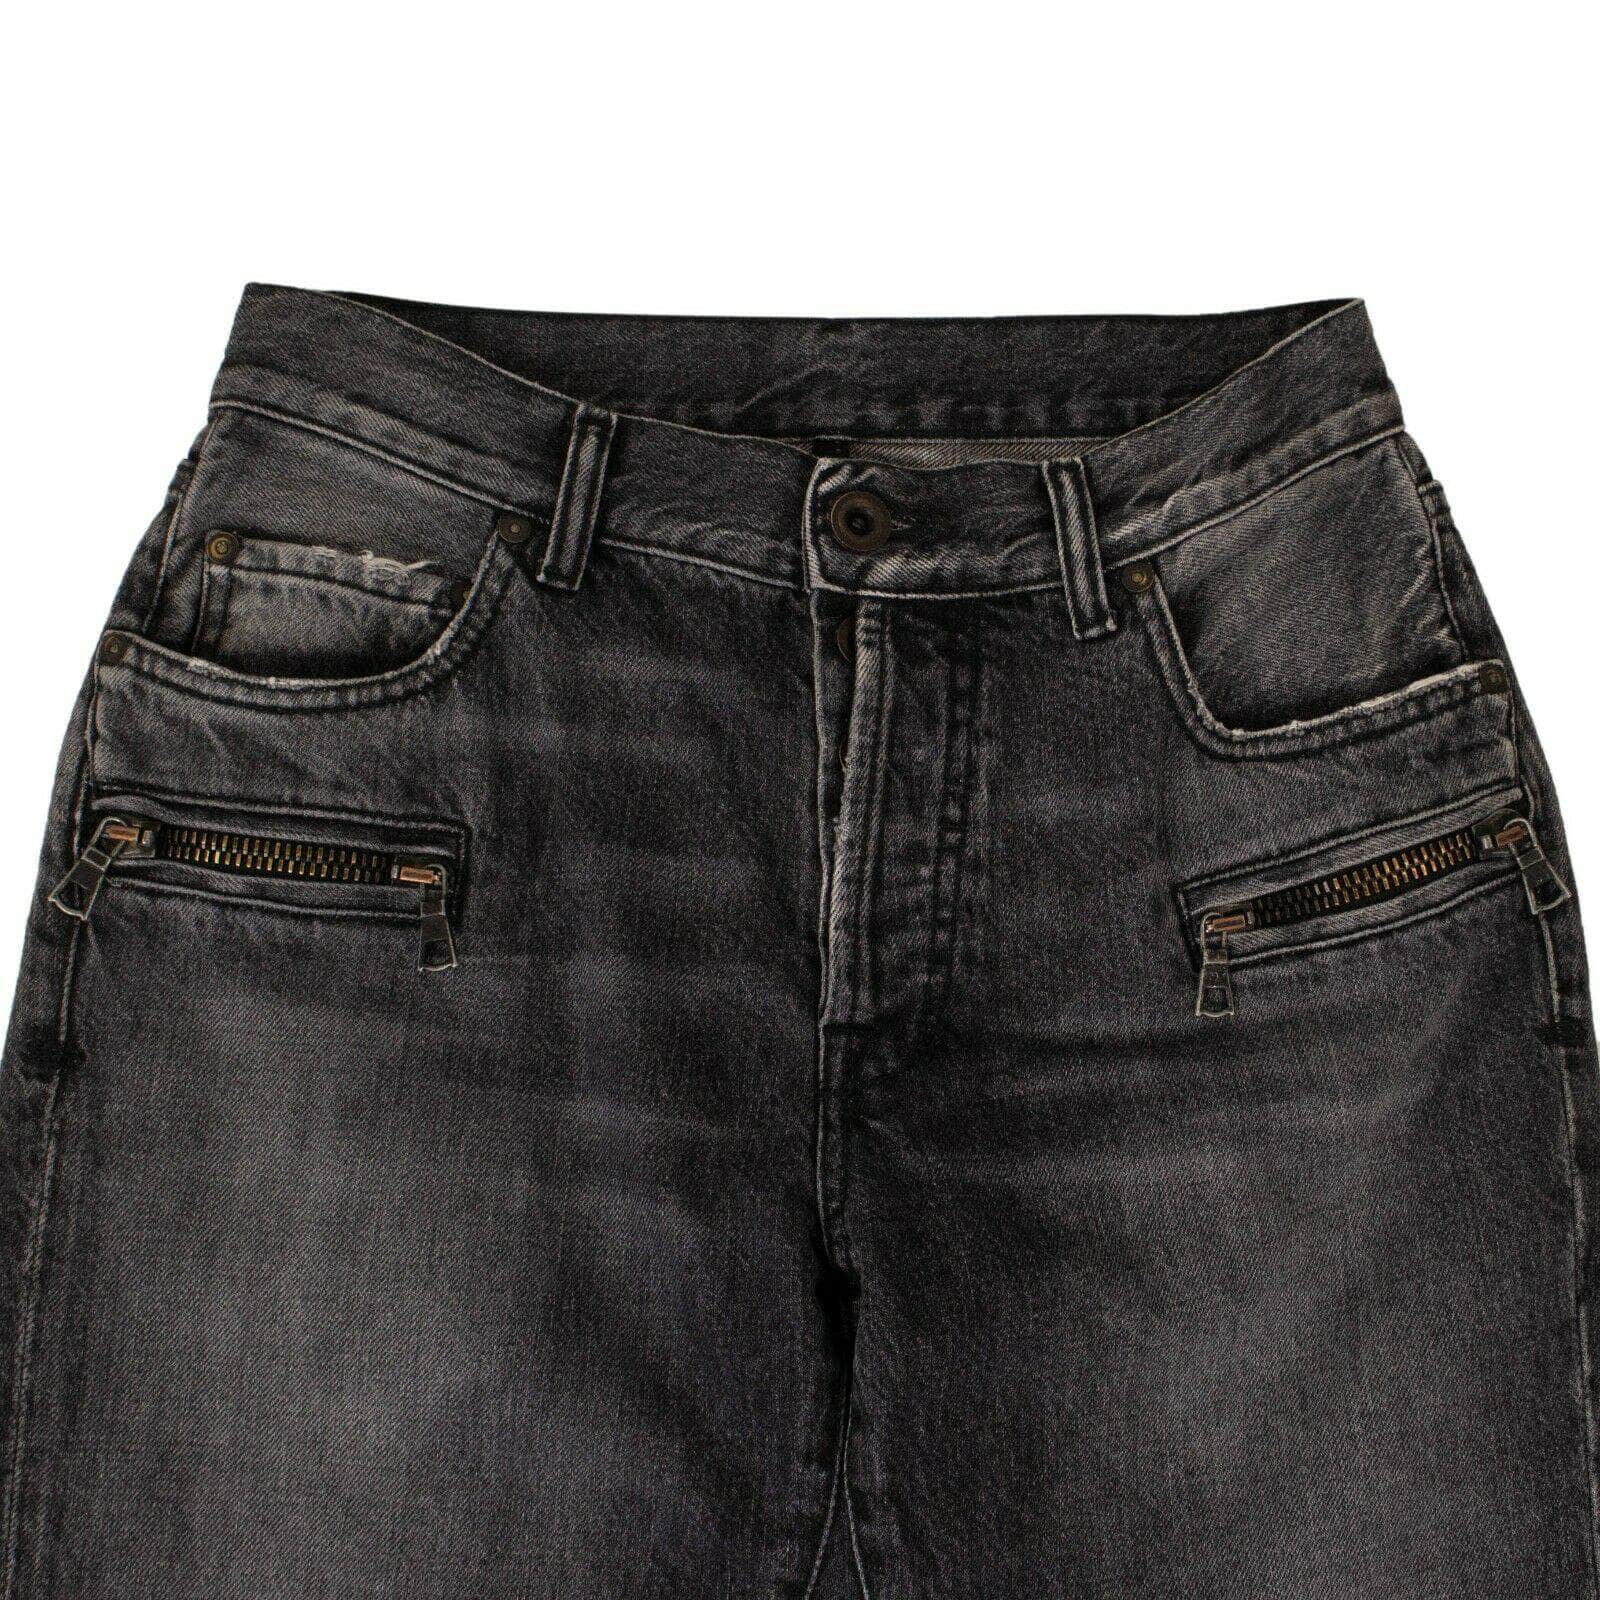 UNRAVEL PROJECT channelenable-all, couponcollection, gender-womens, main-clothing, sale-enable, size-26, under-250, unravel-project 26 Black Zipped Pockets Jeans 82NGG-UN-1190/26 82NGG-UN-1190/26